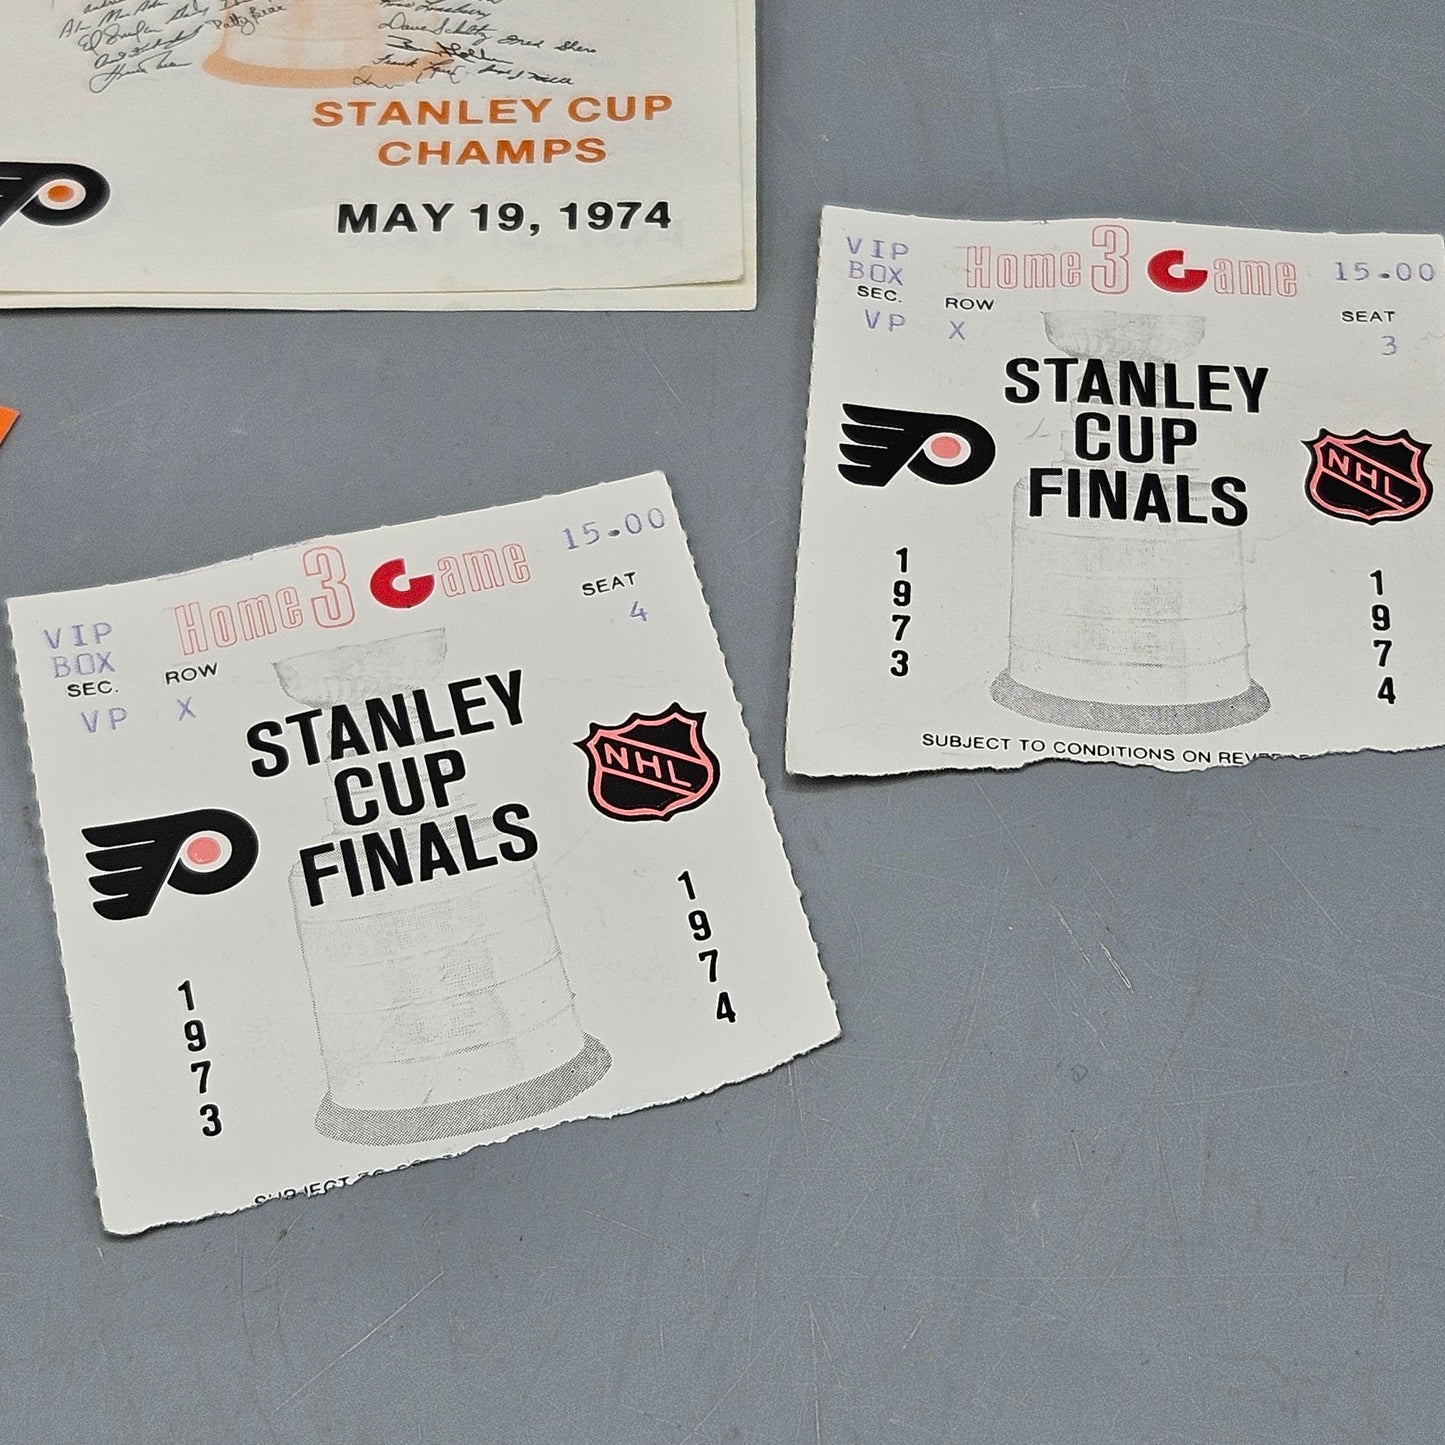 Great Sports Memorabilia from 1973-1974 Stanley Cup Finals Tickets for Game 3